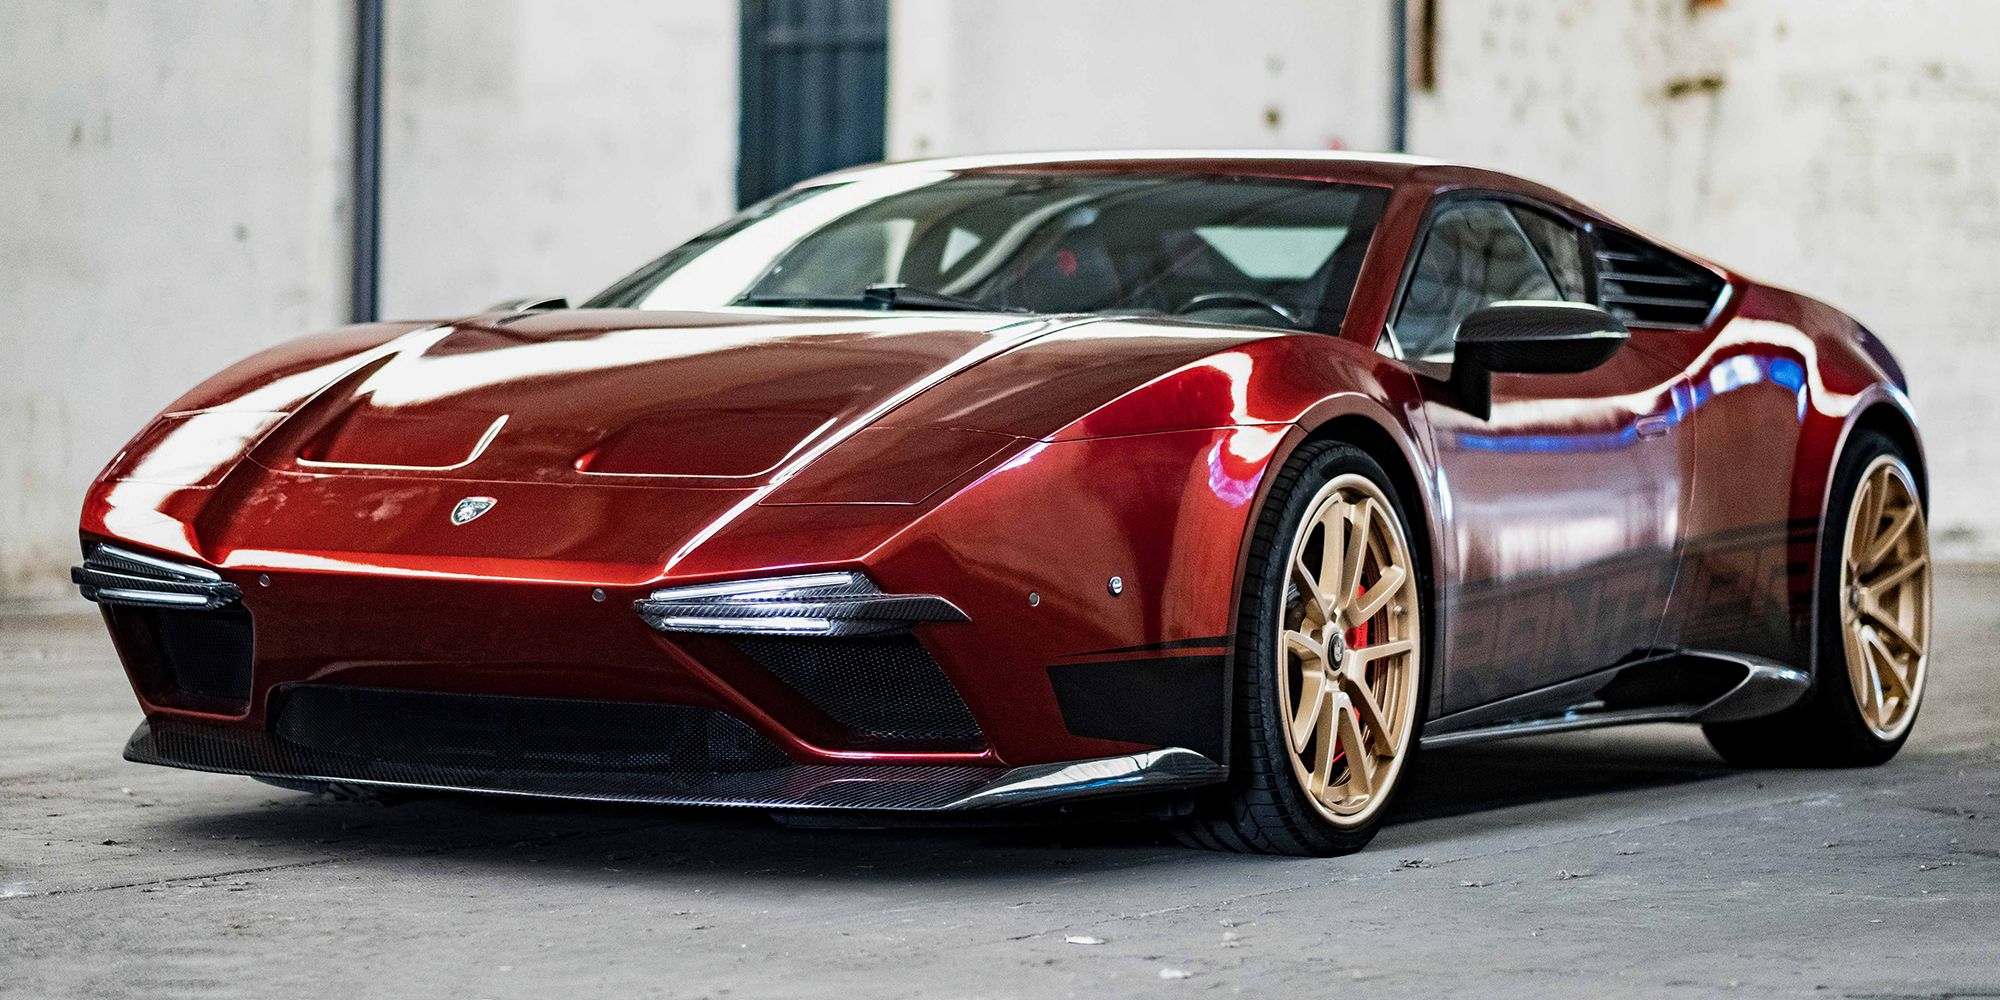 2020 Ares Panther Is a Lamborghini-Powered DeTomaso Tribute